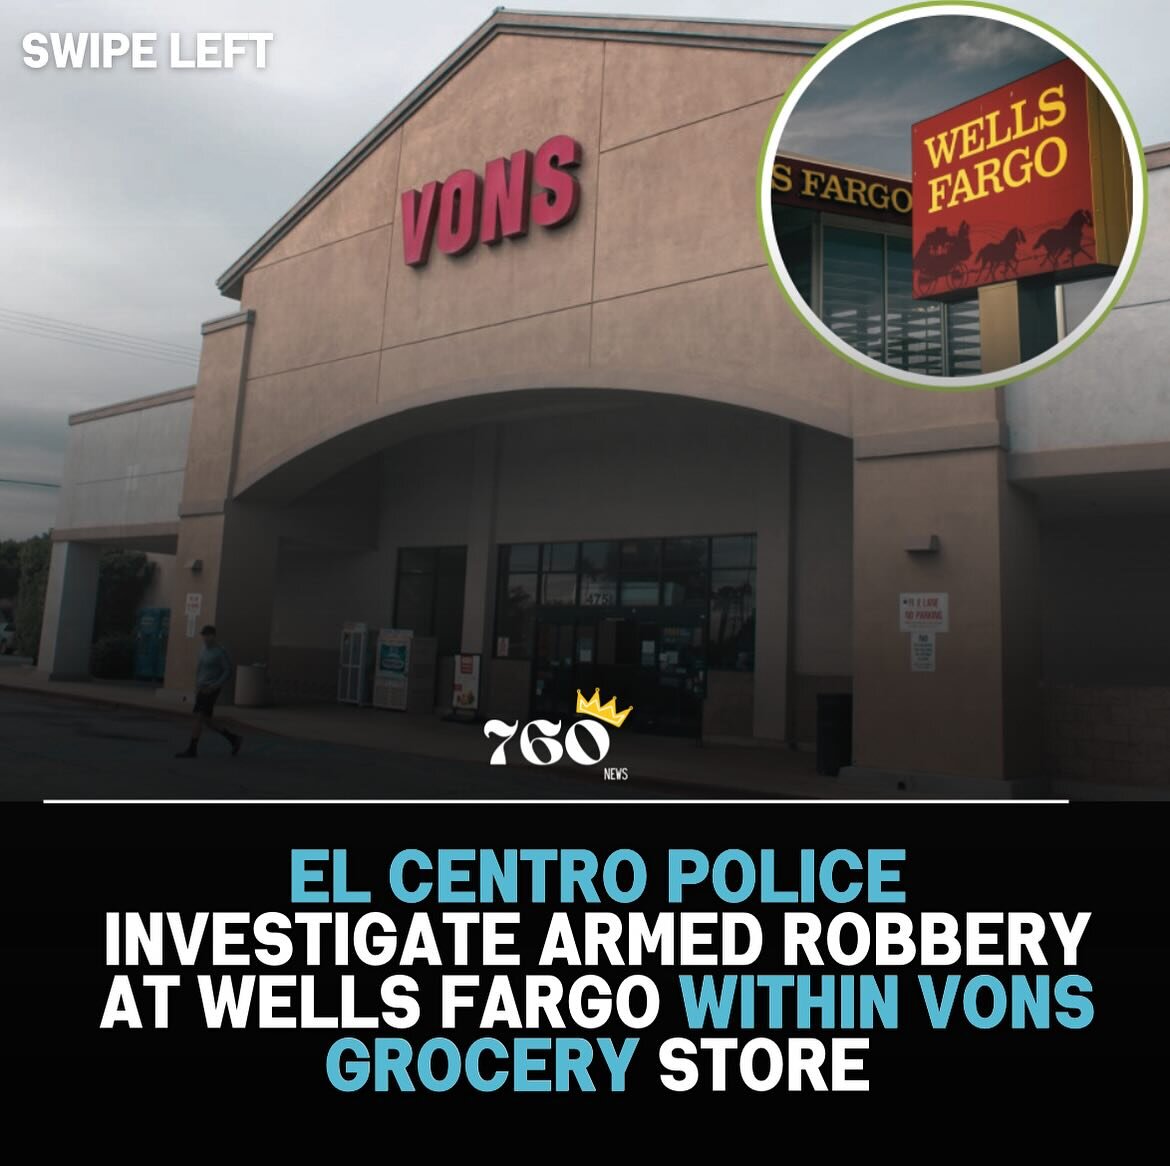 For the full story, please view my story or copy and paste the link below

Full story: https://www.760news.org/local-news/el-centro-police-investigate-armed-robbery-at-wells-fargo-within-vons-grocery-store

#ElCentro #BankRobbery #WellsFargo #VonsGro